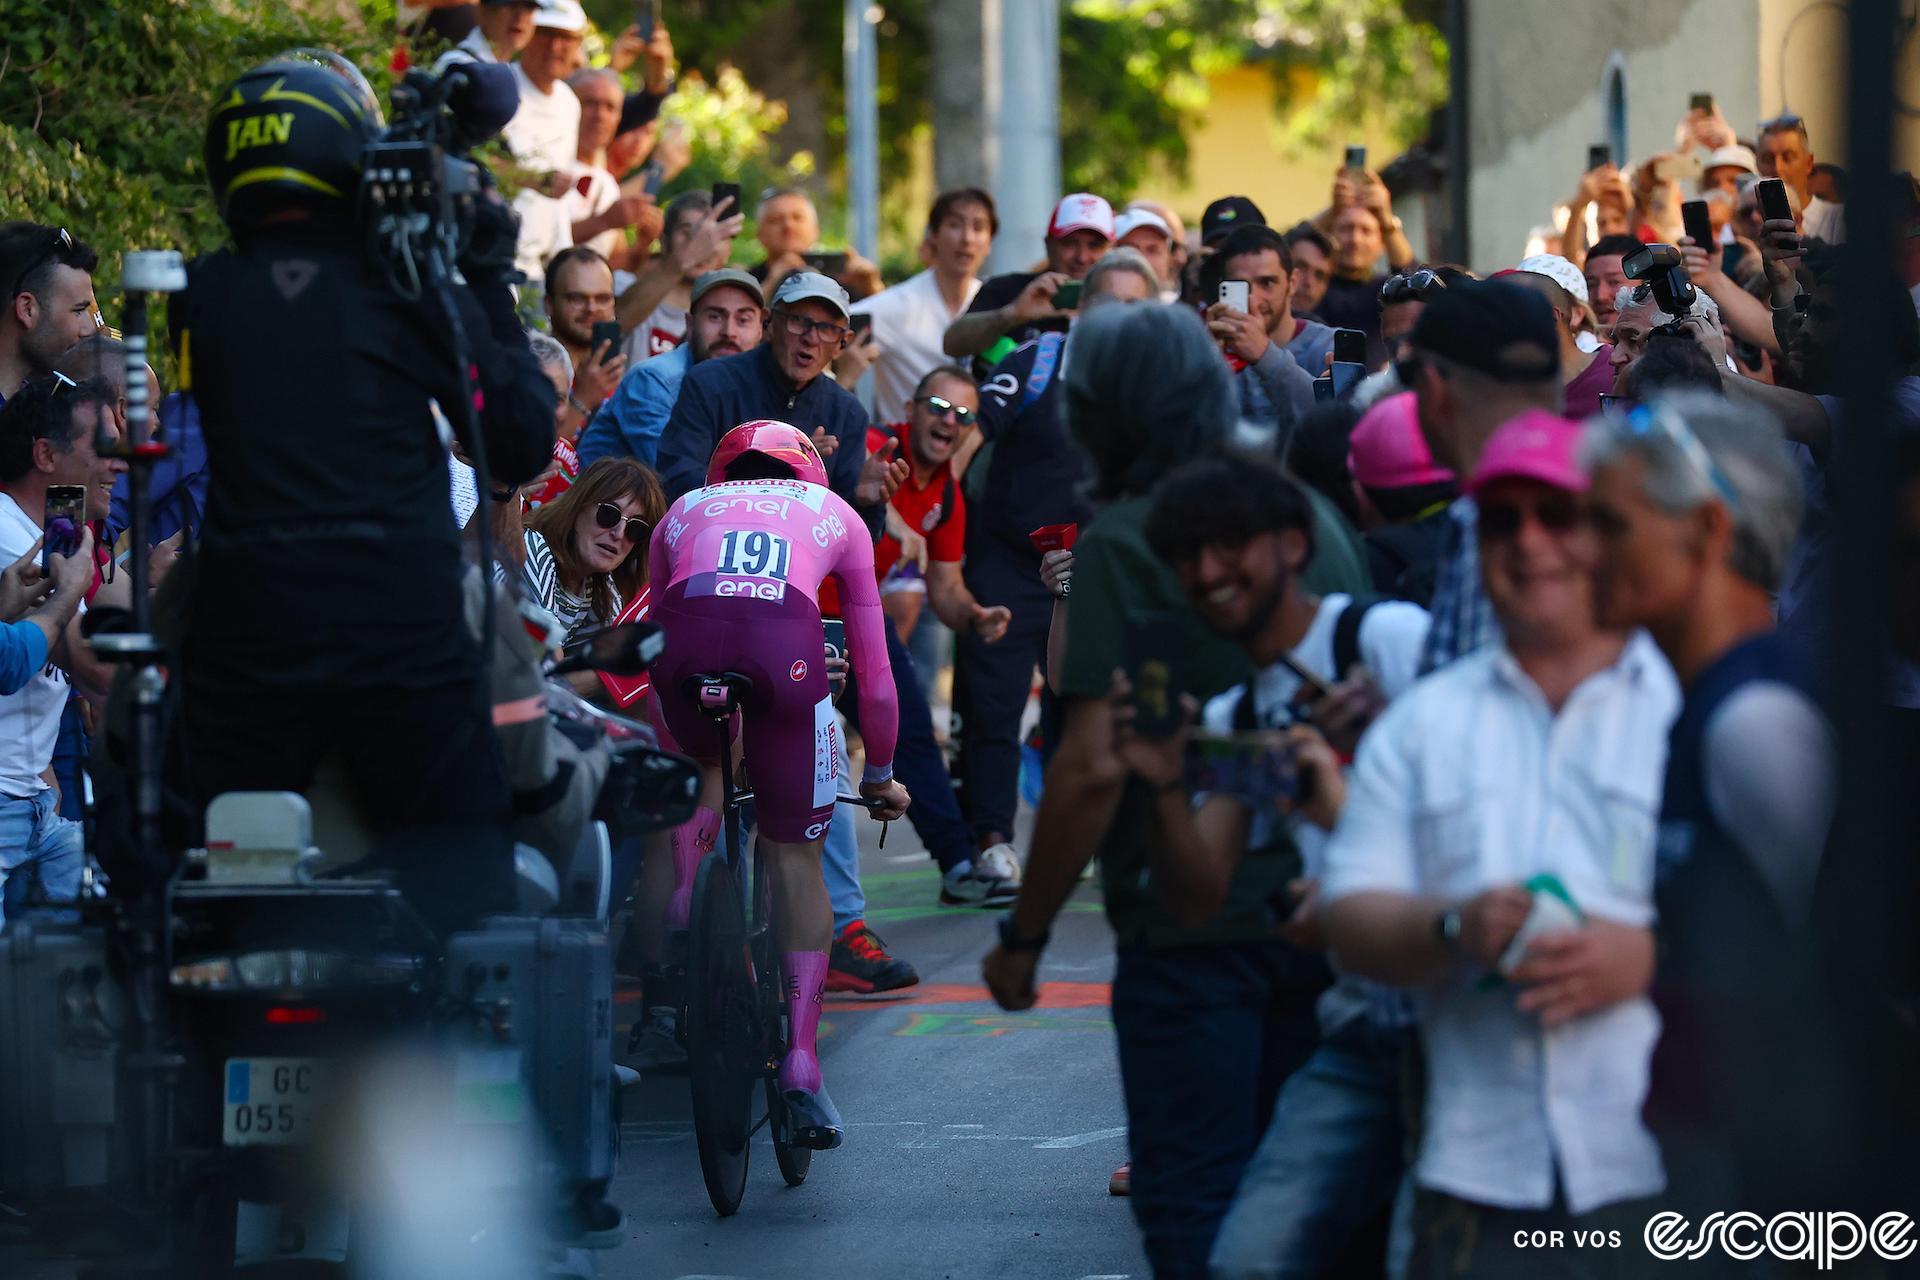 Tadej Pogačar rides the climb to Perugia in stage 7 of the Giro d'Italia. He's alone on his TT bike in his now-allowed pink-and-purple skinsuit, followed by a TV moto as fans lean in to cheer.